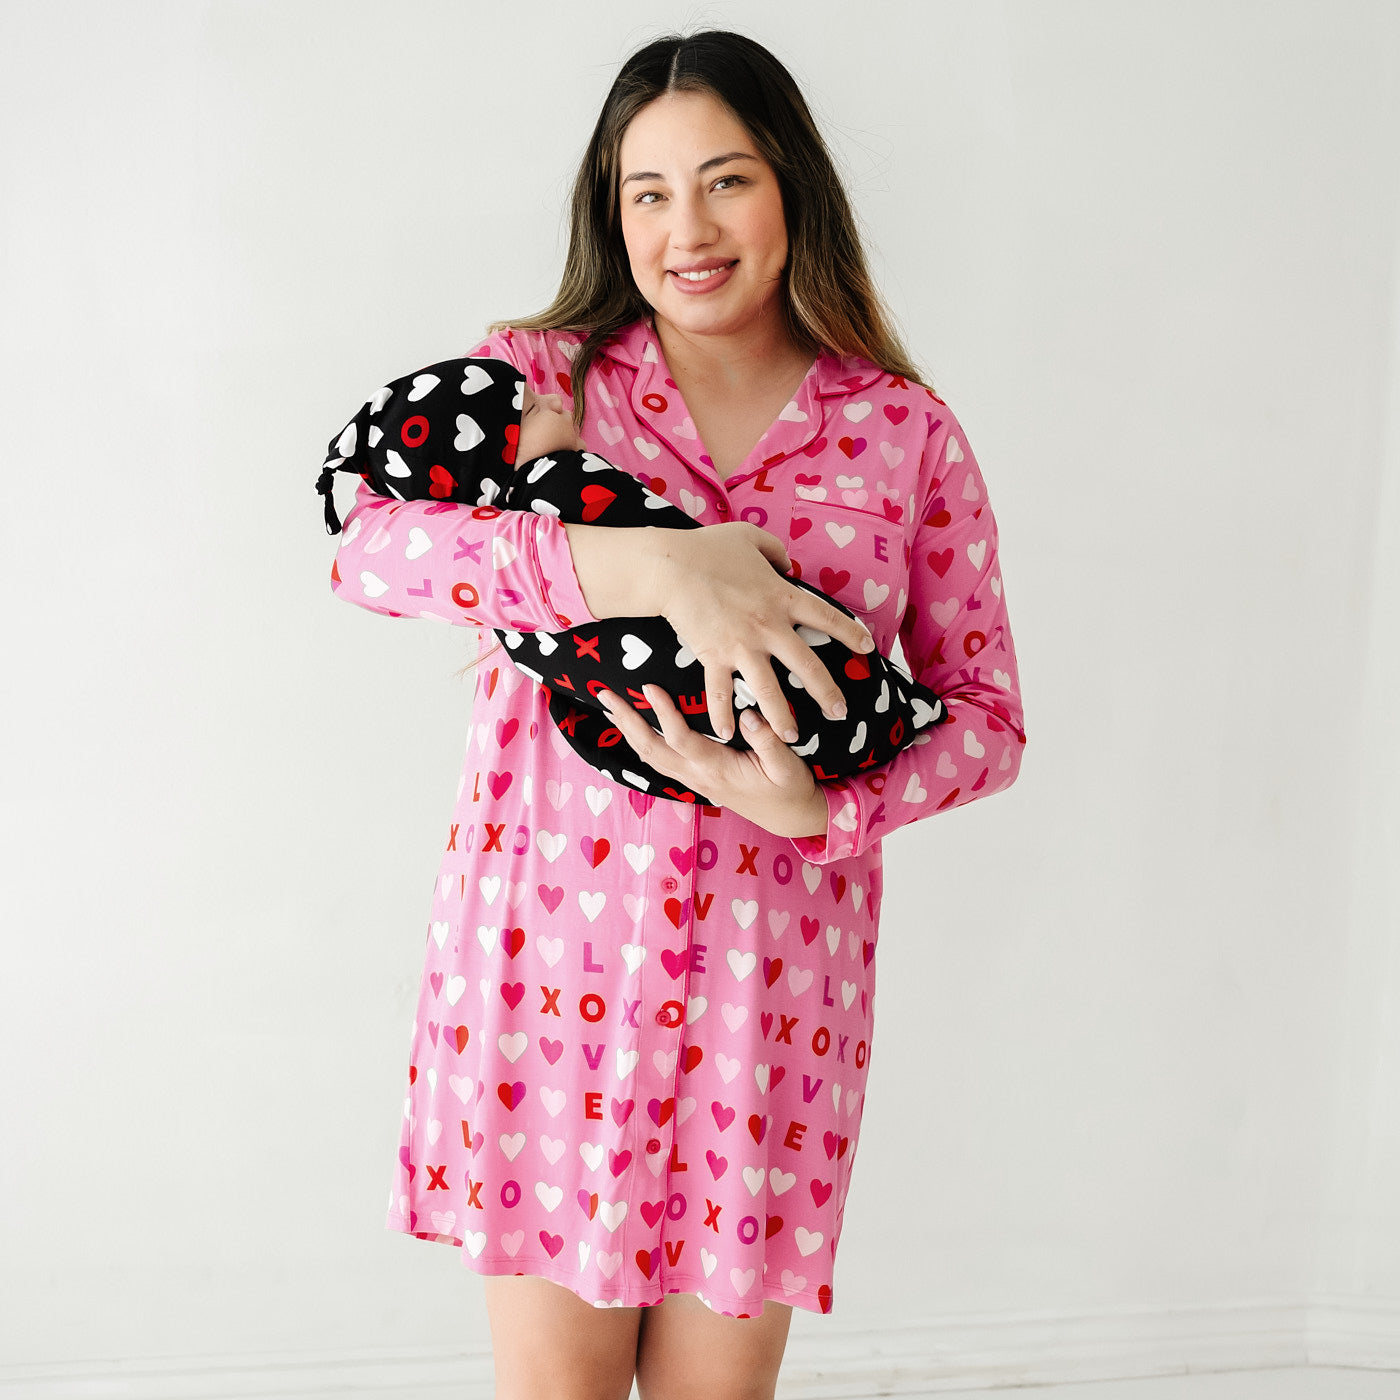 Mom holding her child swaddled in a Black XOXO swaddle and hat set. Mom is wearing a women's Pink XOXO long sleeve sleep shirt